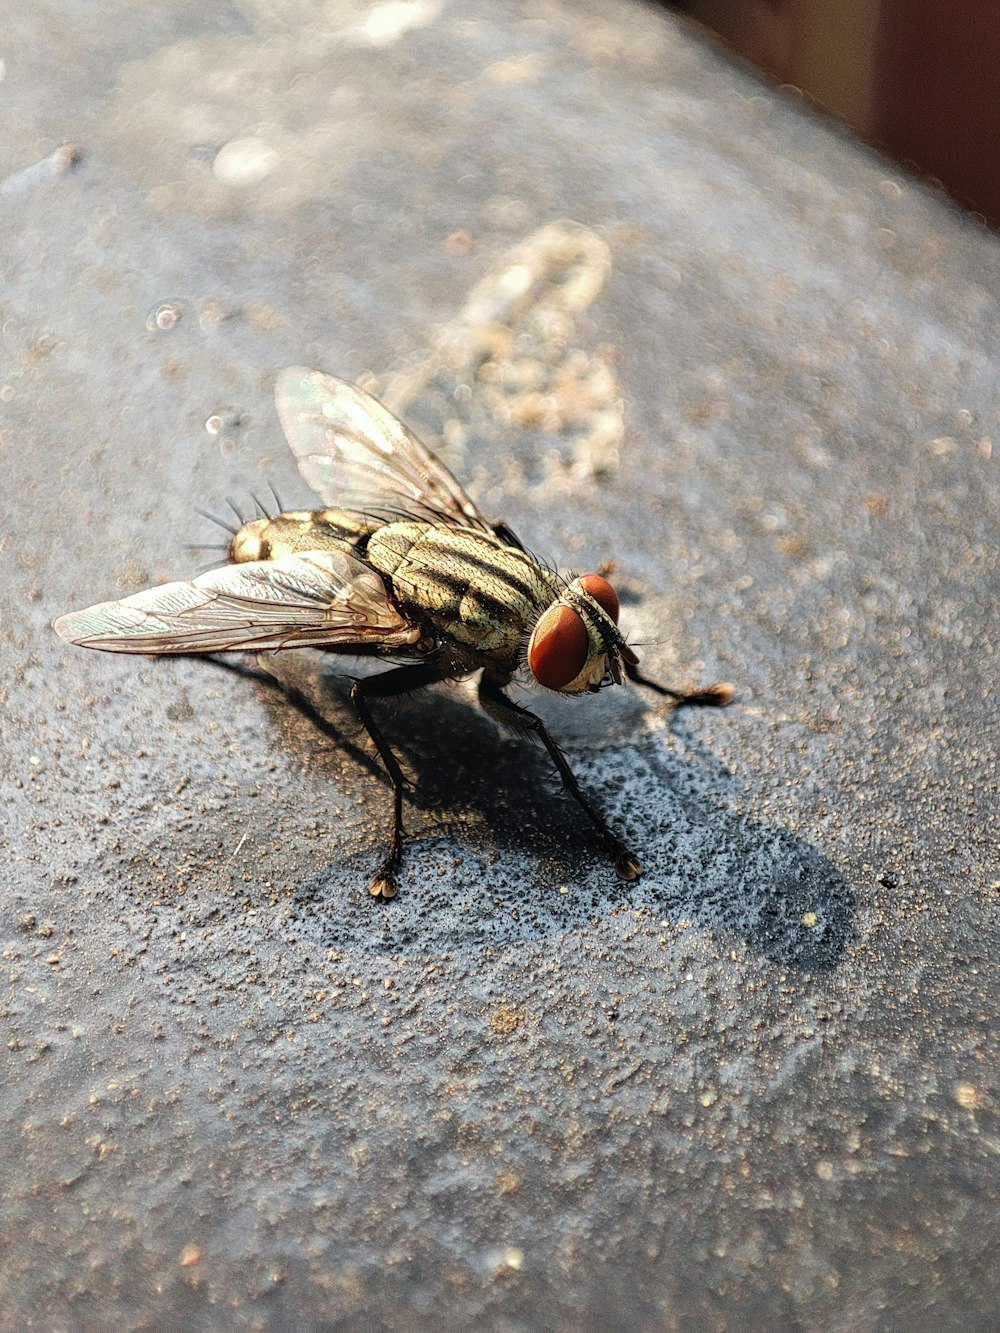 a close up of a fly on a cement surface